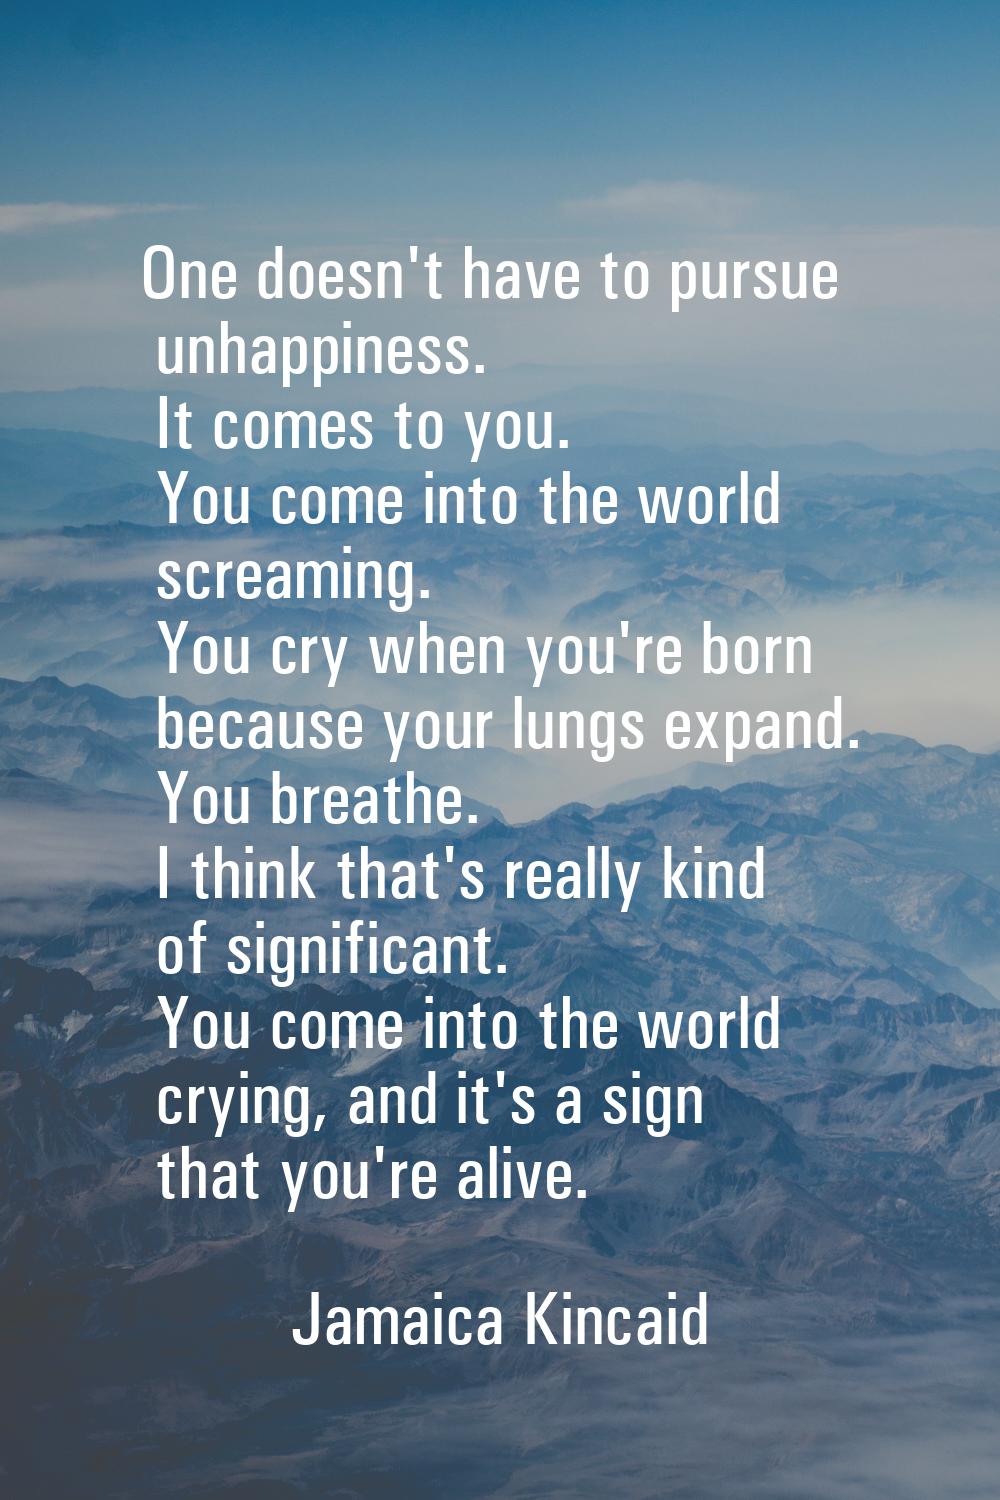 One doesn't have to pursue unhappiness. It comes to you. You come into the world screaming. You cry